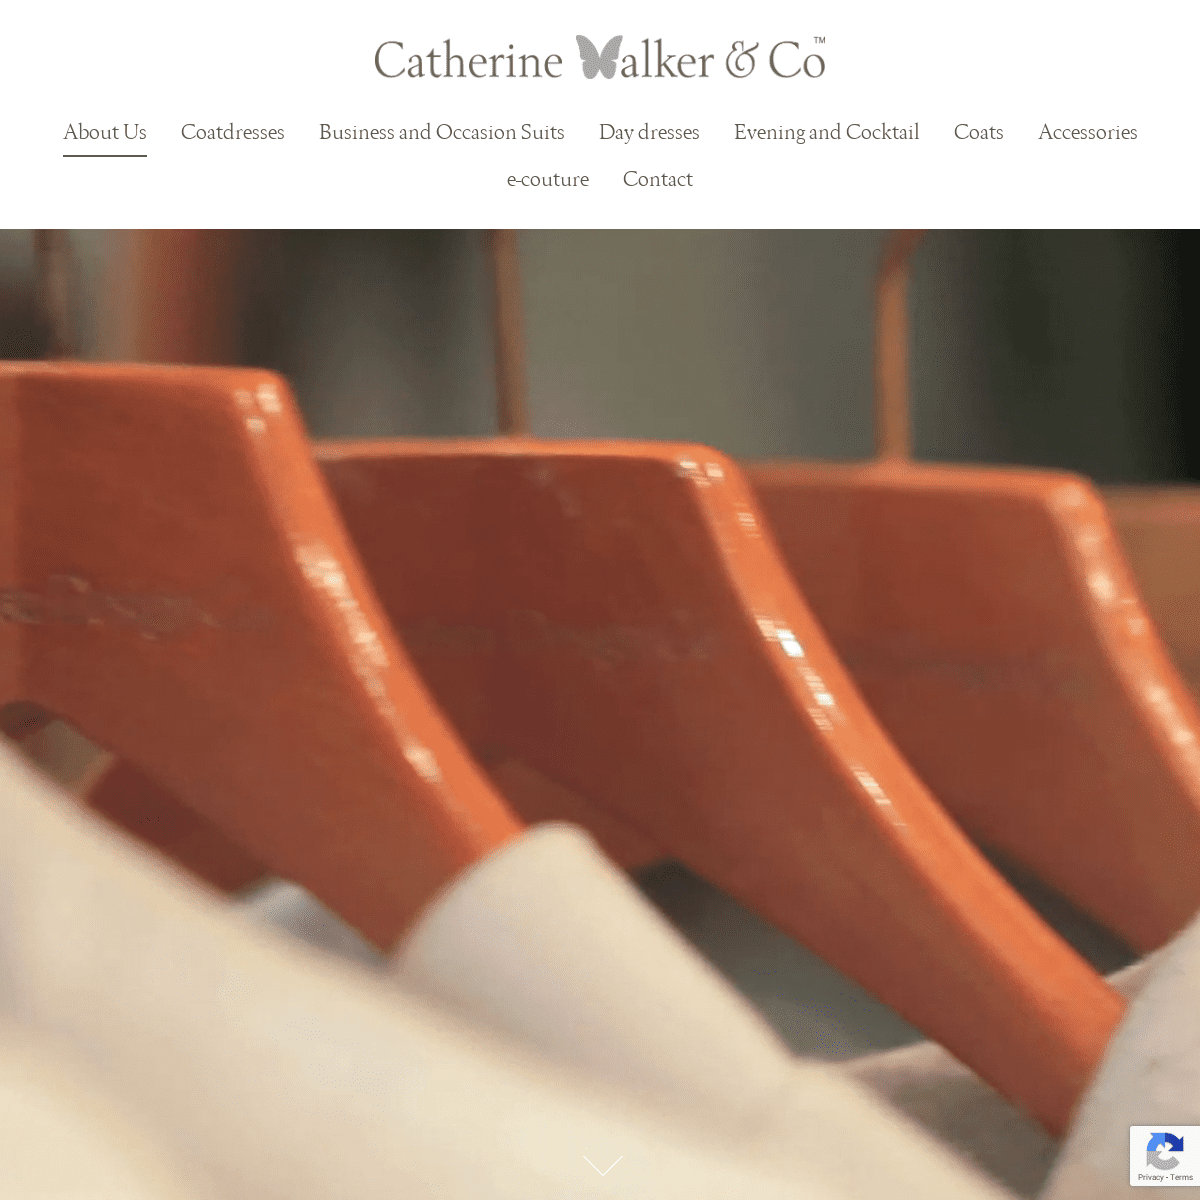 Catherine Walker – now and since 1977